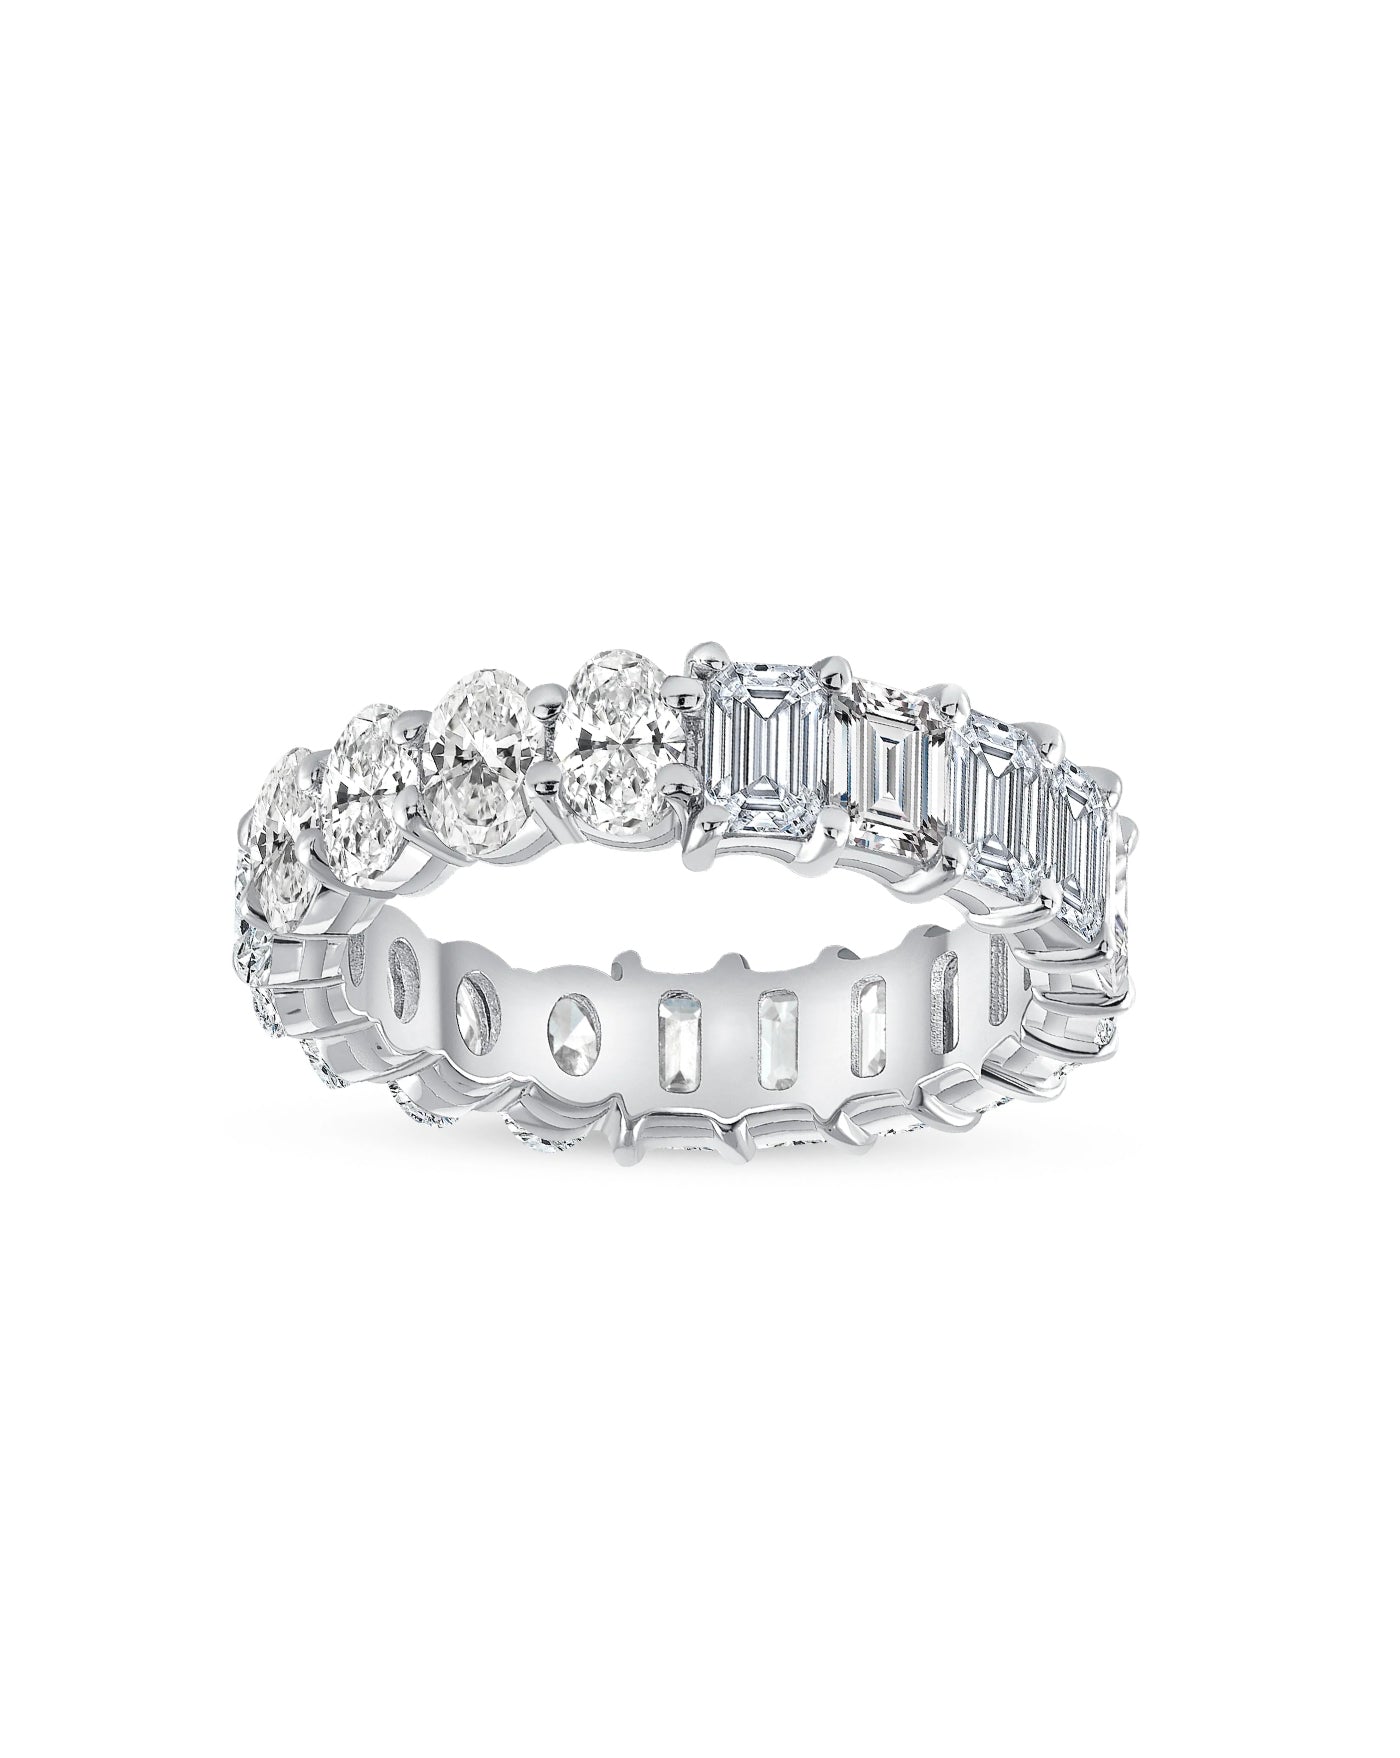 Half and Half Eternity Band Ring | Oval and Emerald Cut 4ct LAB Diamond